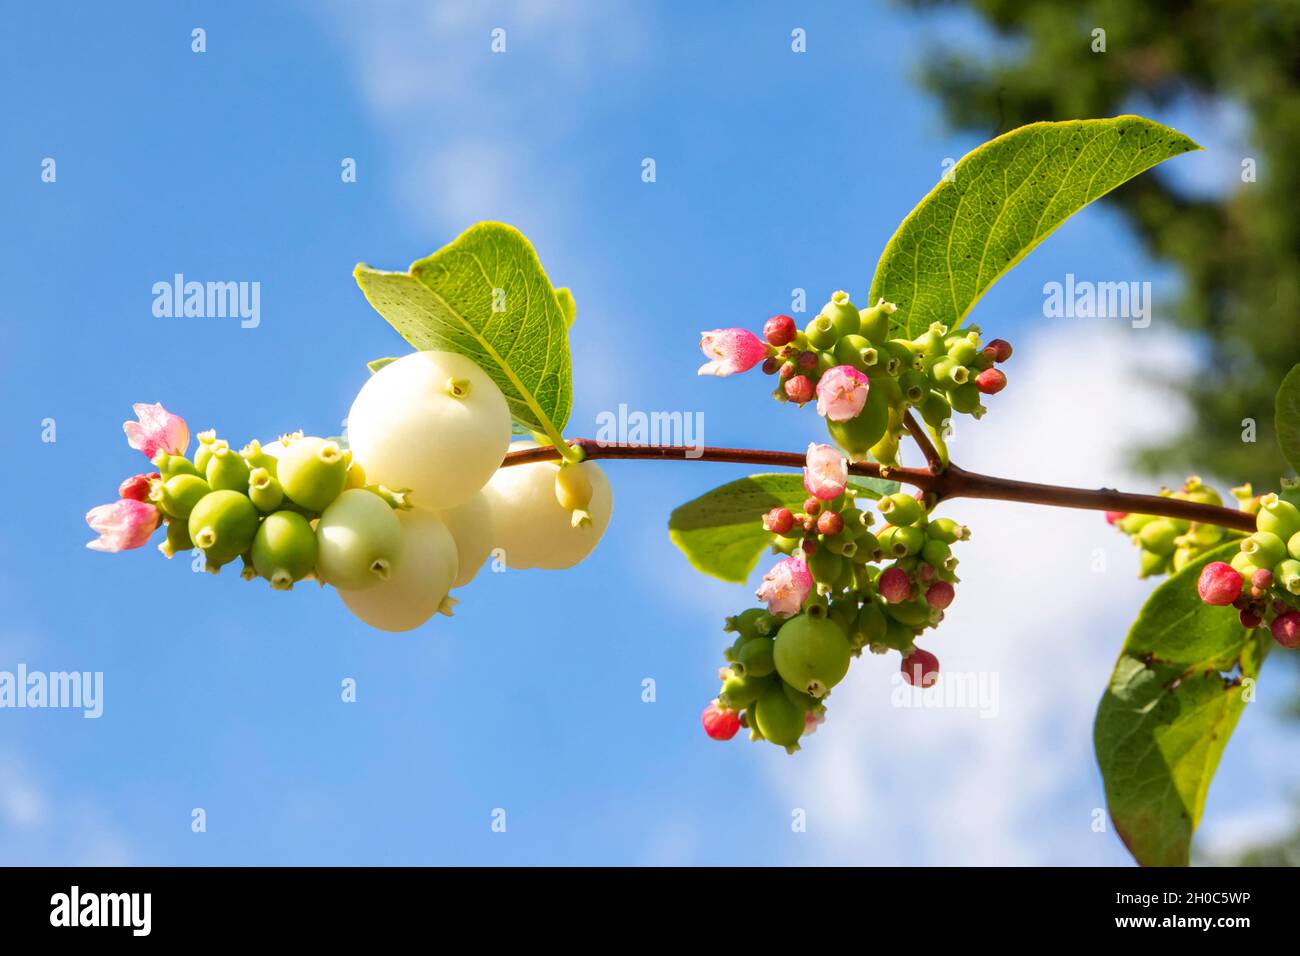 Common snowberry (Symphoricarpos albus), Invasive alien species. Detail of flowers and berries in summer, Lorraine countryside, France Stock Photo